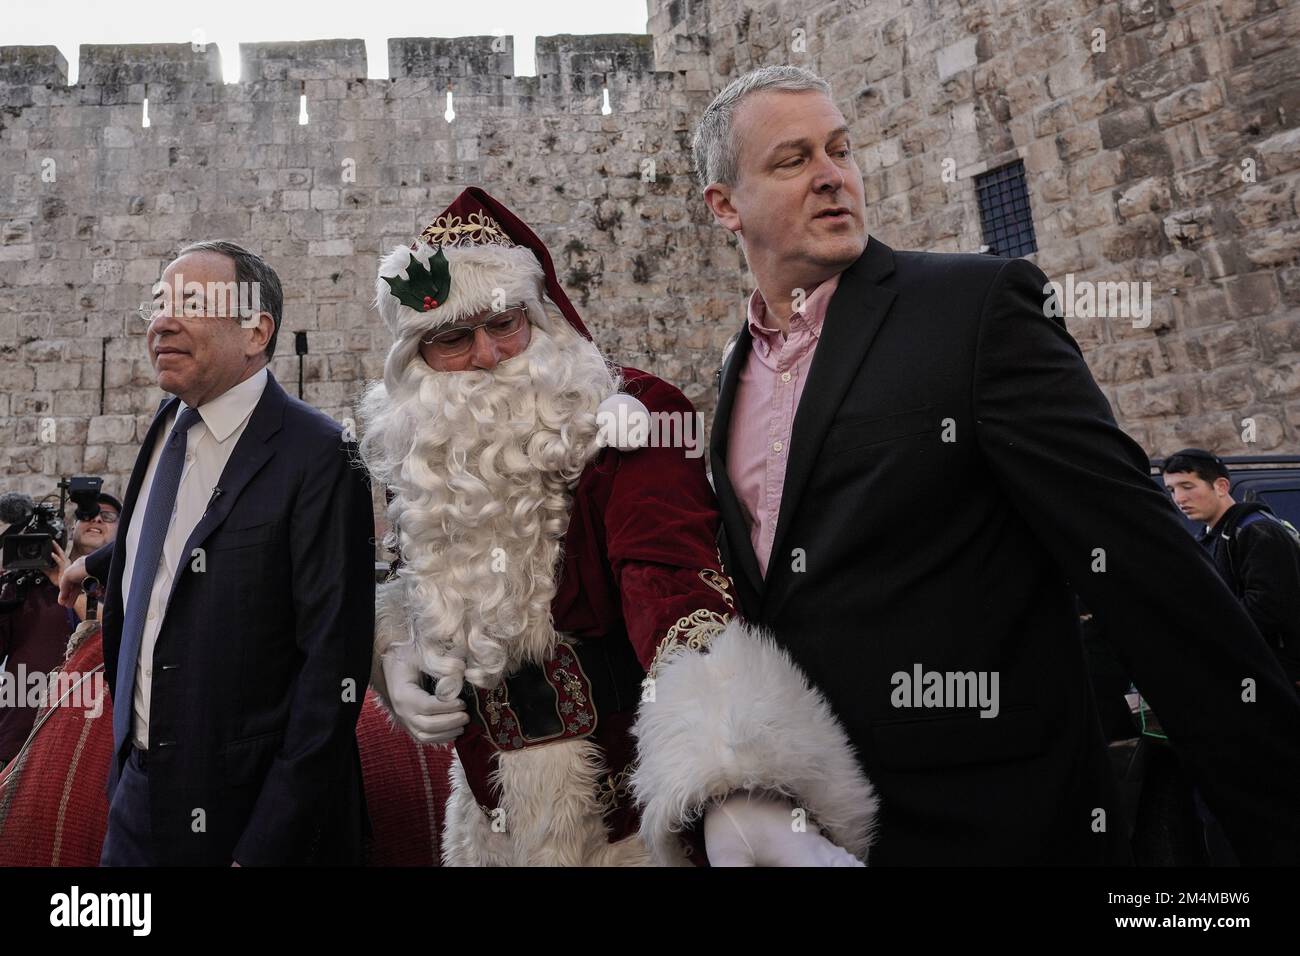 Jerusalem, Israel. 22nd Dec, 2022. U.S. Ambassador to Israel, THOMAS NIDES (L), and GEORGE NOLL (R), Chief Of The U.S. Office Of Palestinian Affairs, meet Santa Claus, portrayed by ISSA KASSISSIEH, at the Old City's Jaffa Gate. Credit: Nir Alon/Alamy Live News Stock Photo